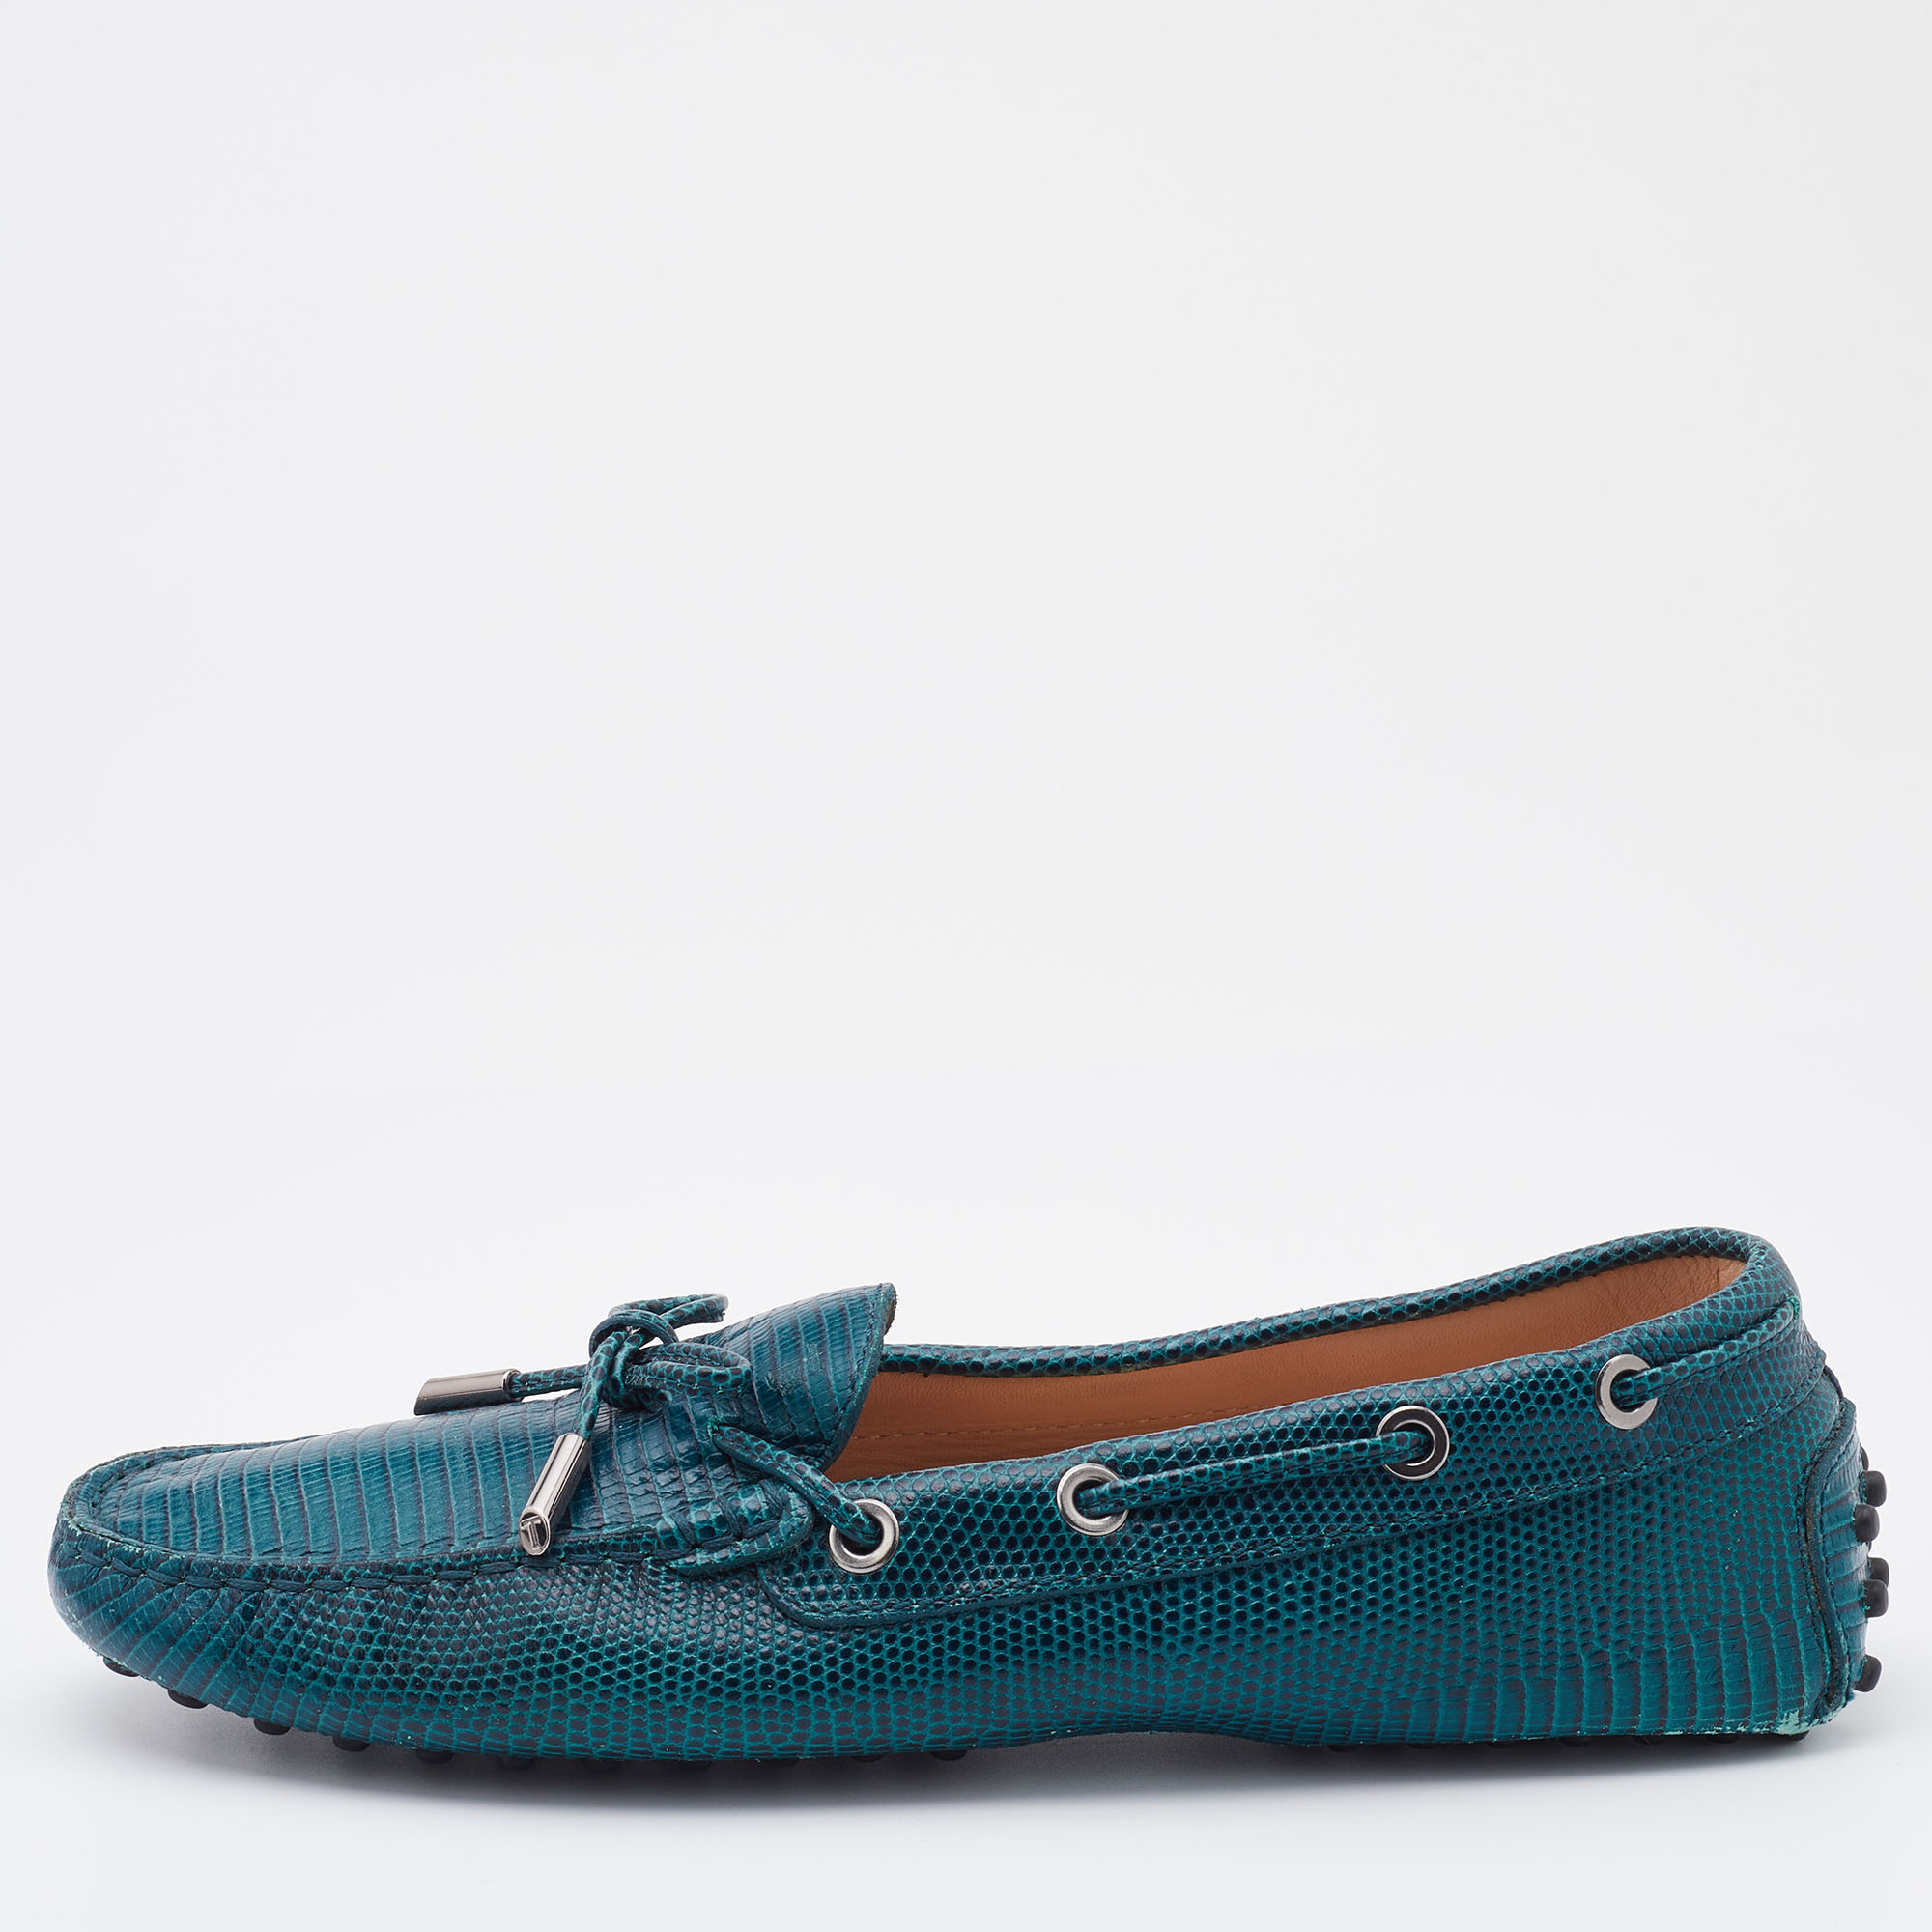 

Tod's Teal Blue Lizard Embossed Leather Bow Slip On Loafers Size